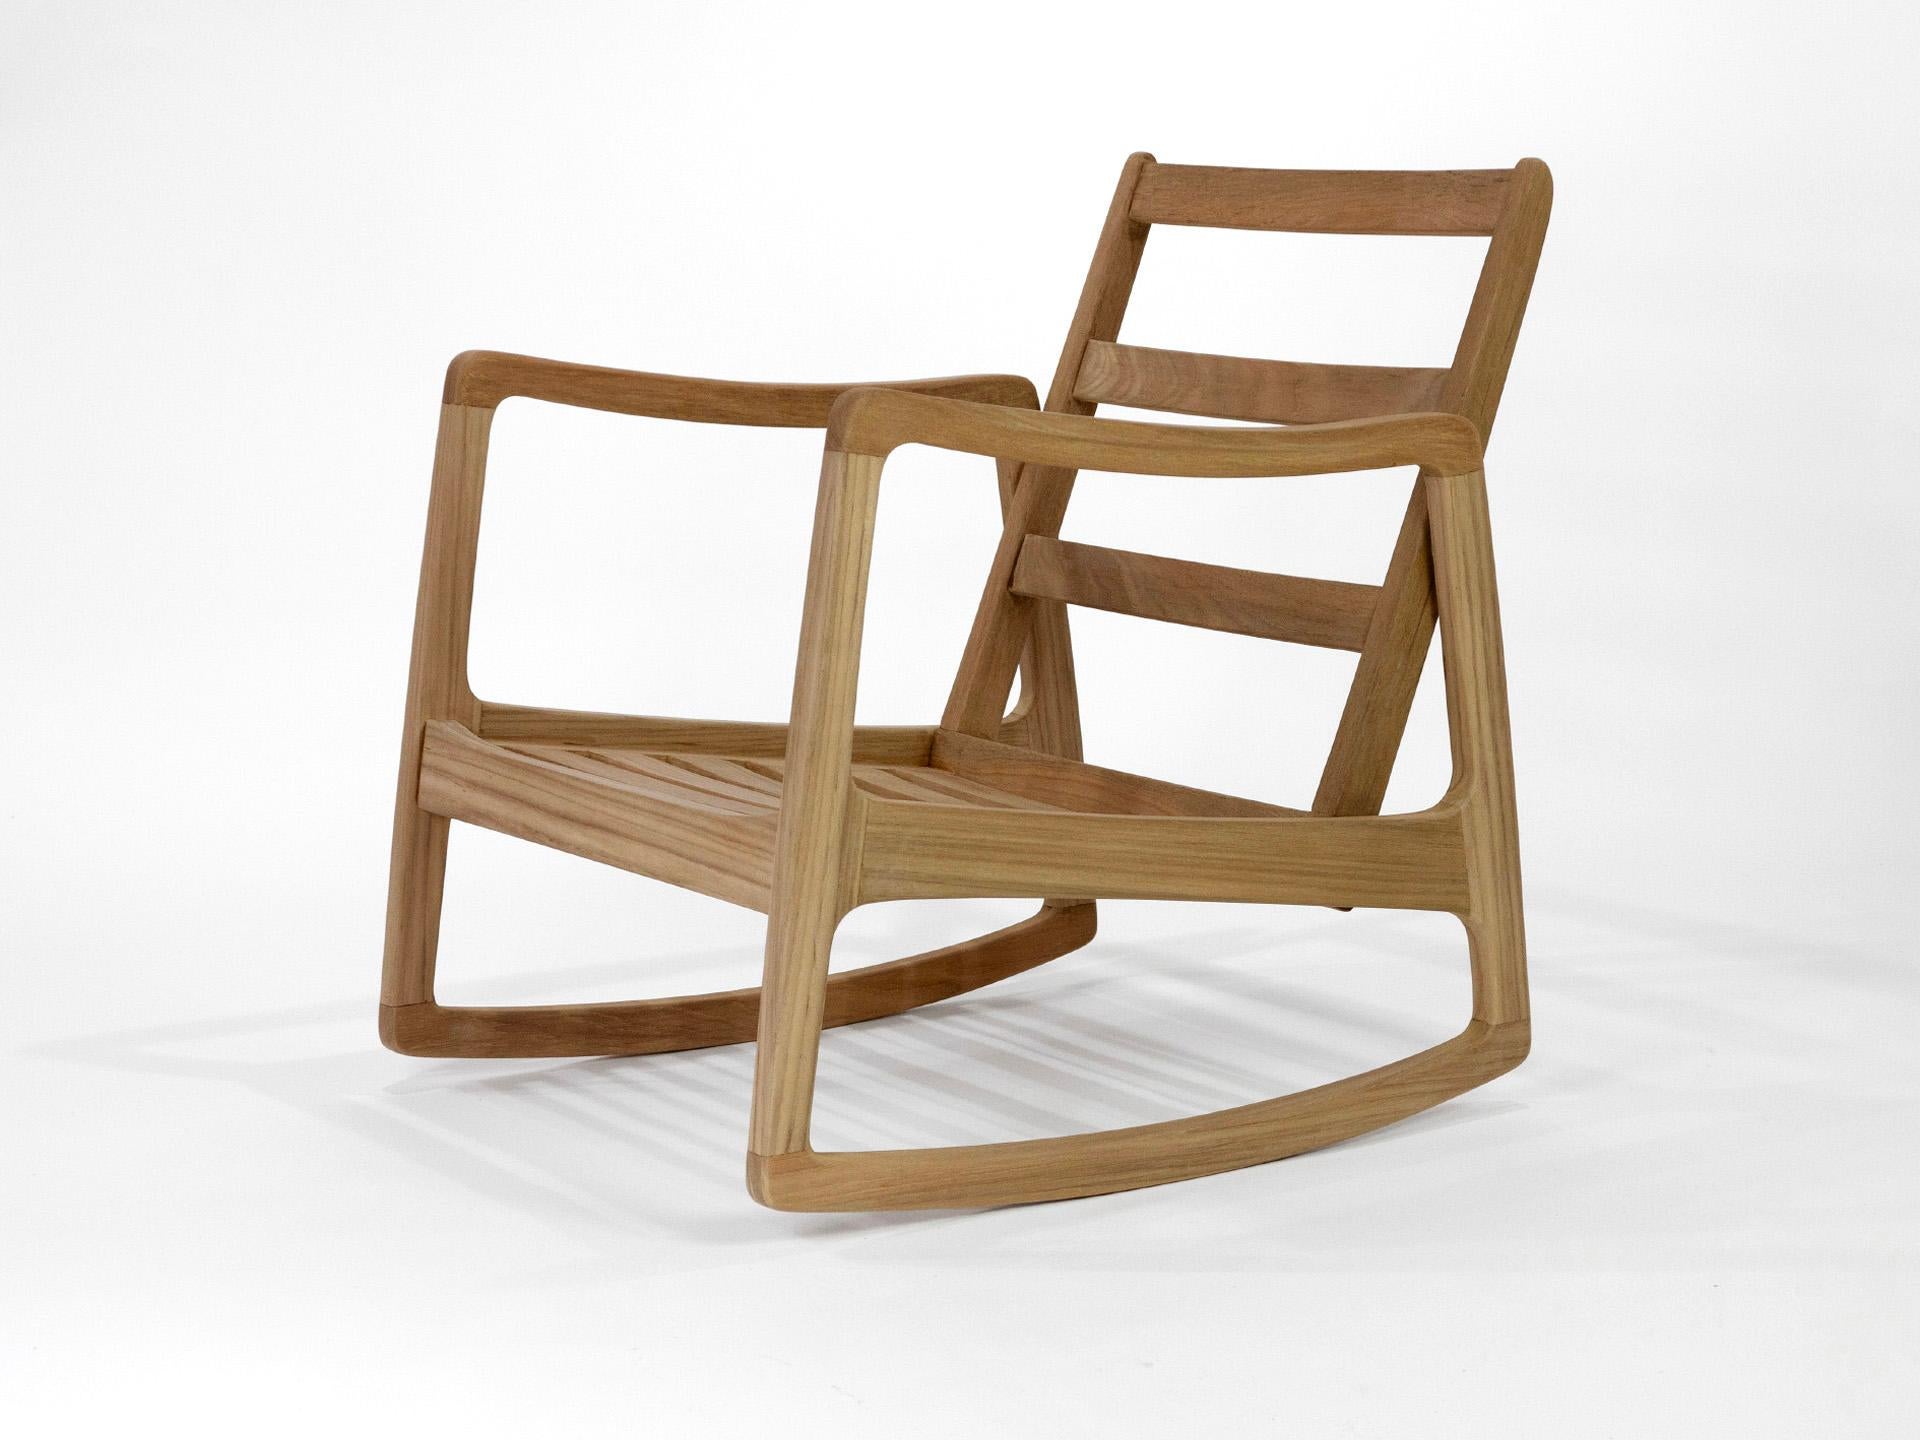 The Rocking chair is based on a Mid-20th century design by John Stuart for Widdocomb as a replacement for those purchased by the customer’s grandparents in the 1950s. It is designed to work as an outdoor, or indoor chair, so the joinery and